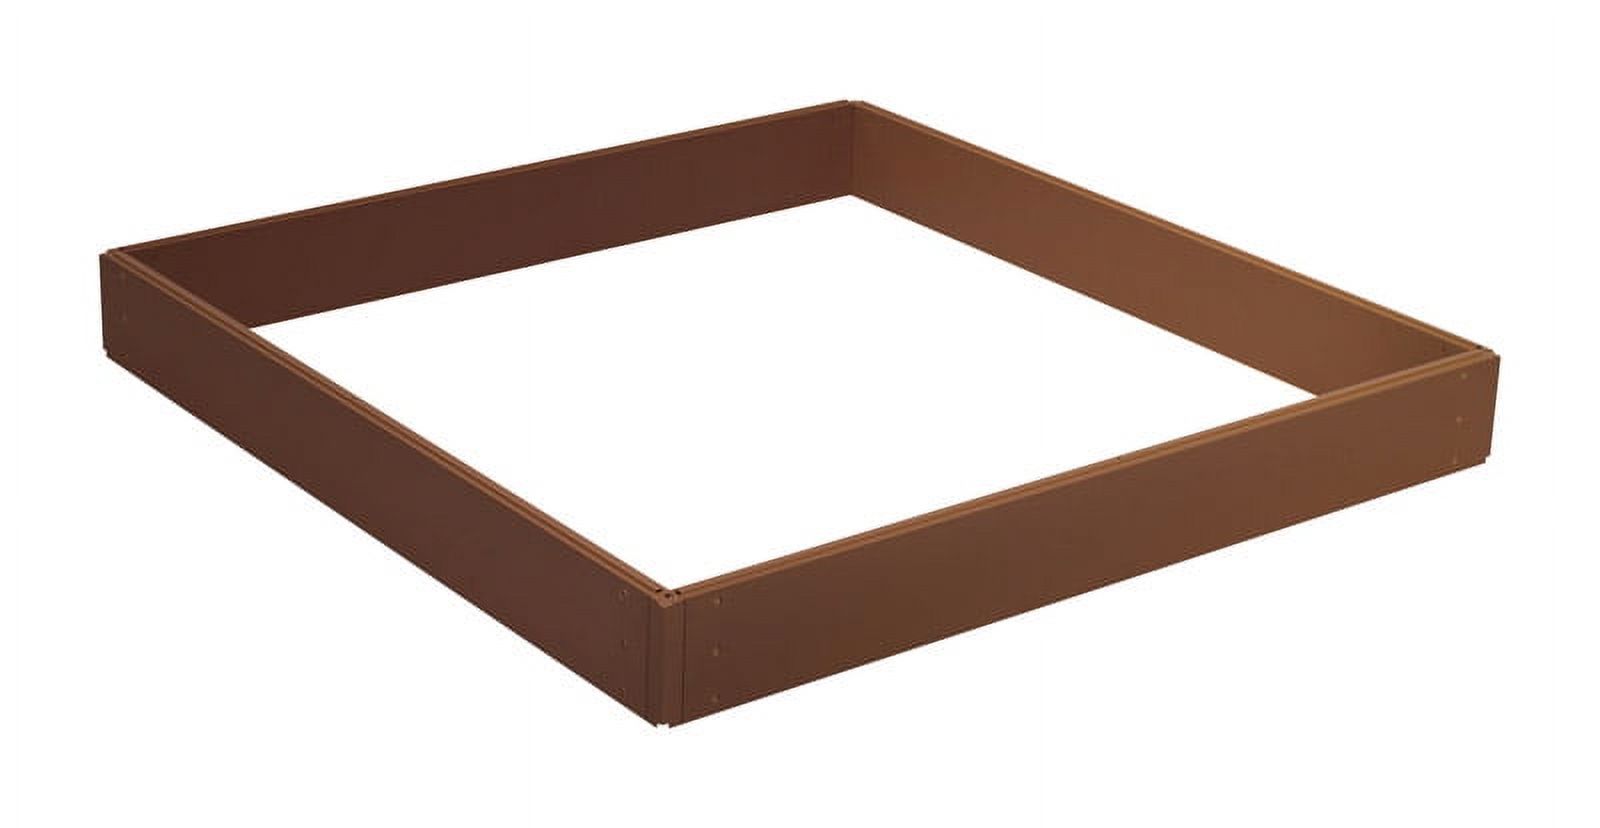 Suncast 5.5 in. H X 46 in. W X 46 in. D Resin Elevated Garden Bed Kit Brown - image 1 of 2